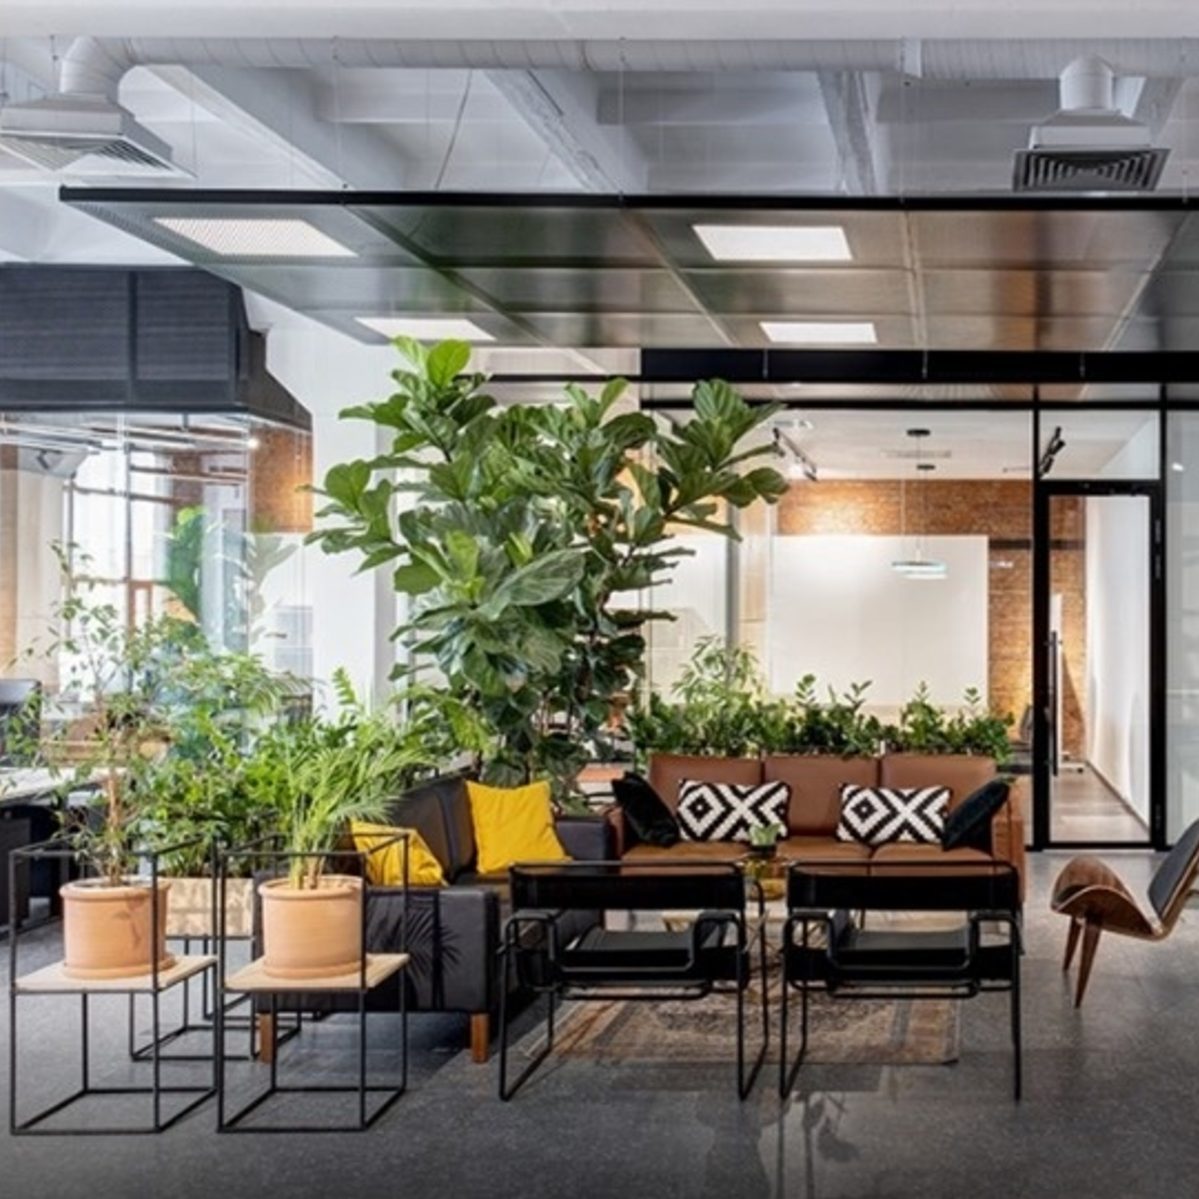 Designing for the Hybrid Workplace